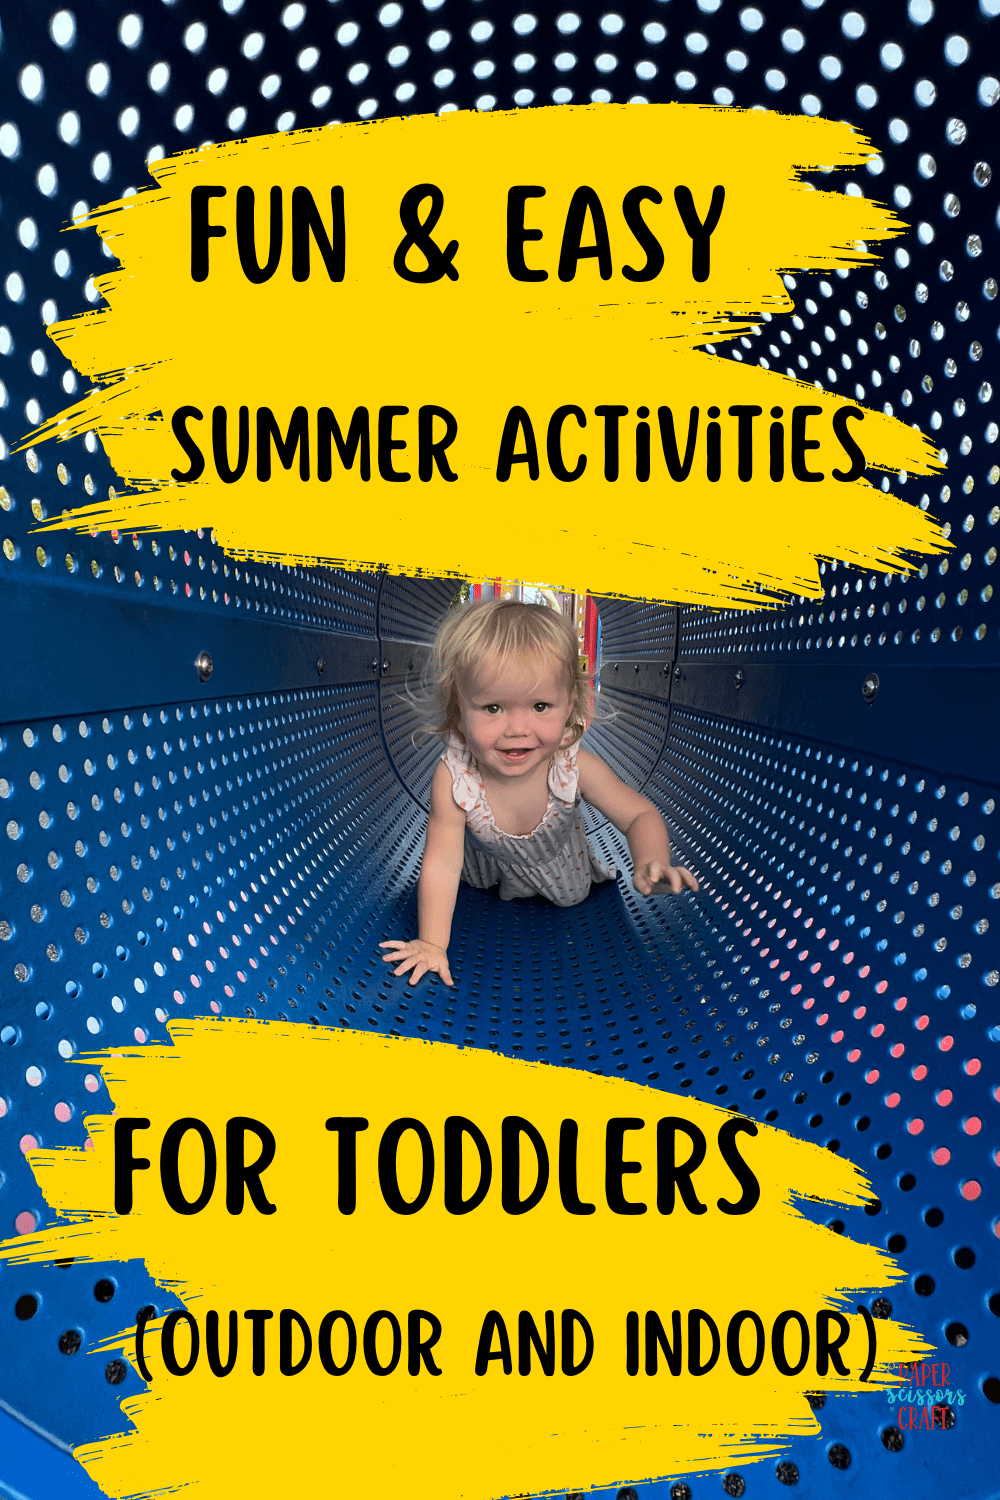 Fun and easy summer activities for toddlers (outdoor and indoor) Pinterest pin.